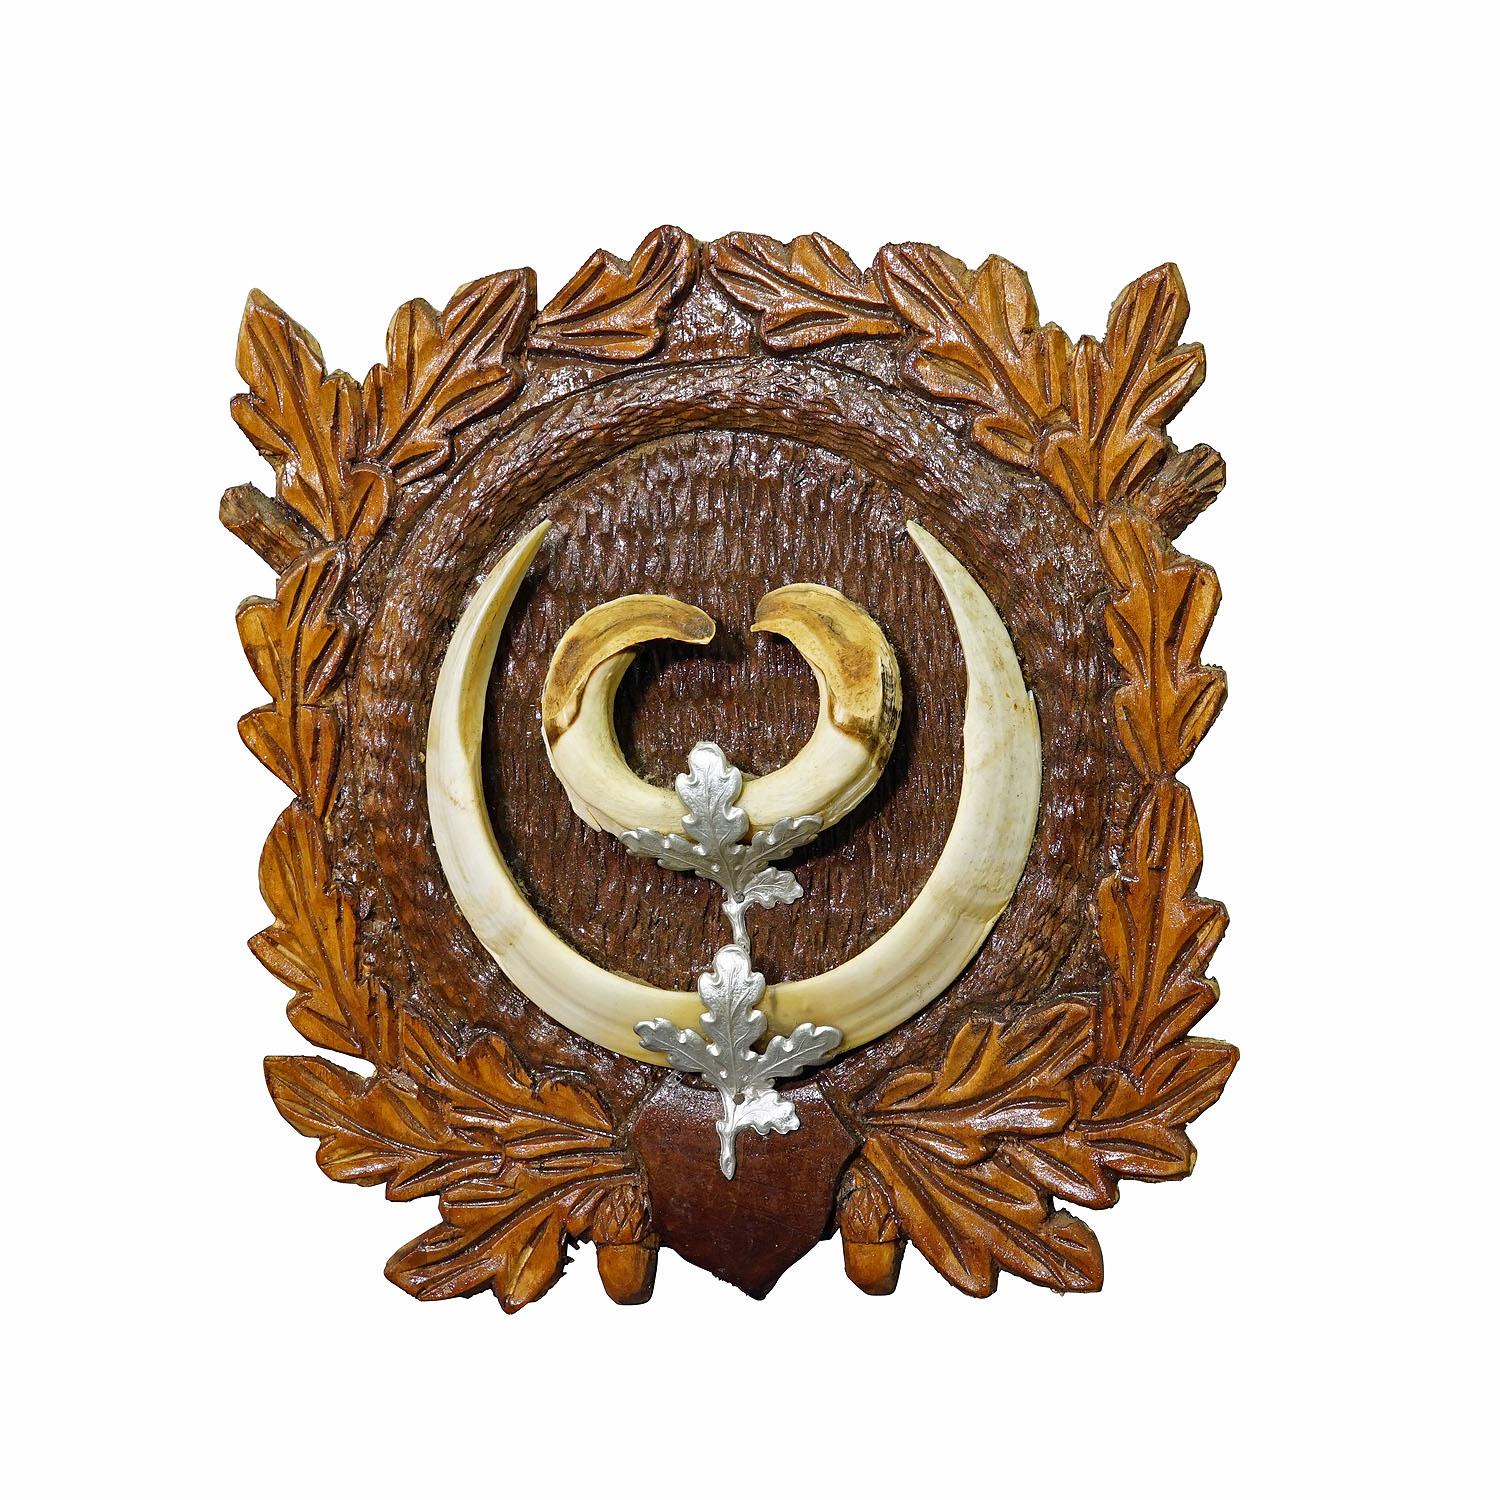 Large Wild Boar Teeth Trophy on Wooden Carved Plaque, Germany 1930s

A large vintage Black Forest wild boar (Sus scrofa) trophy on woodencarved  plaque. The teeth are decorated with two metal mountings which depict oak leaves. The boar was shot in